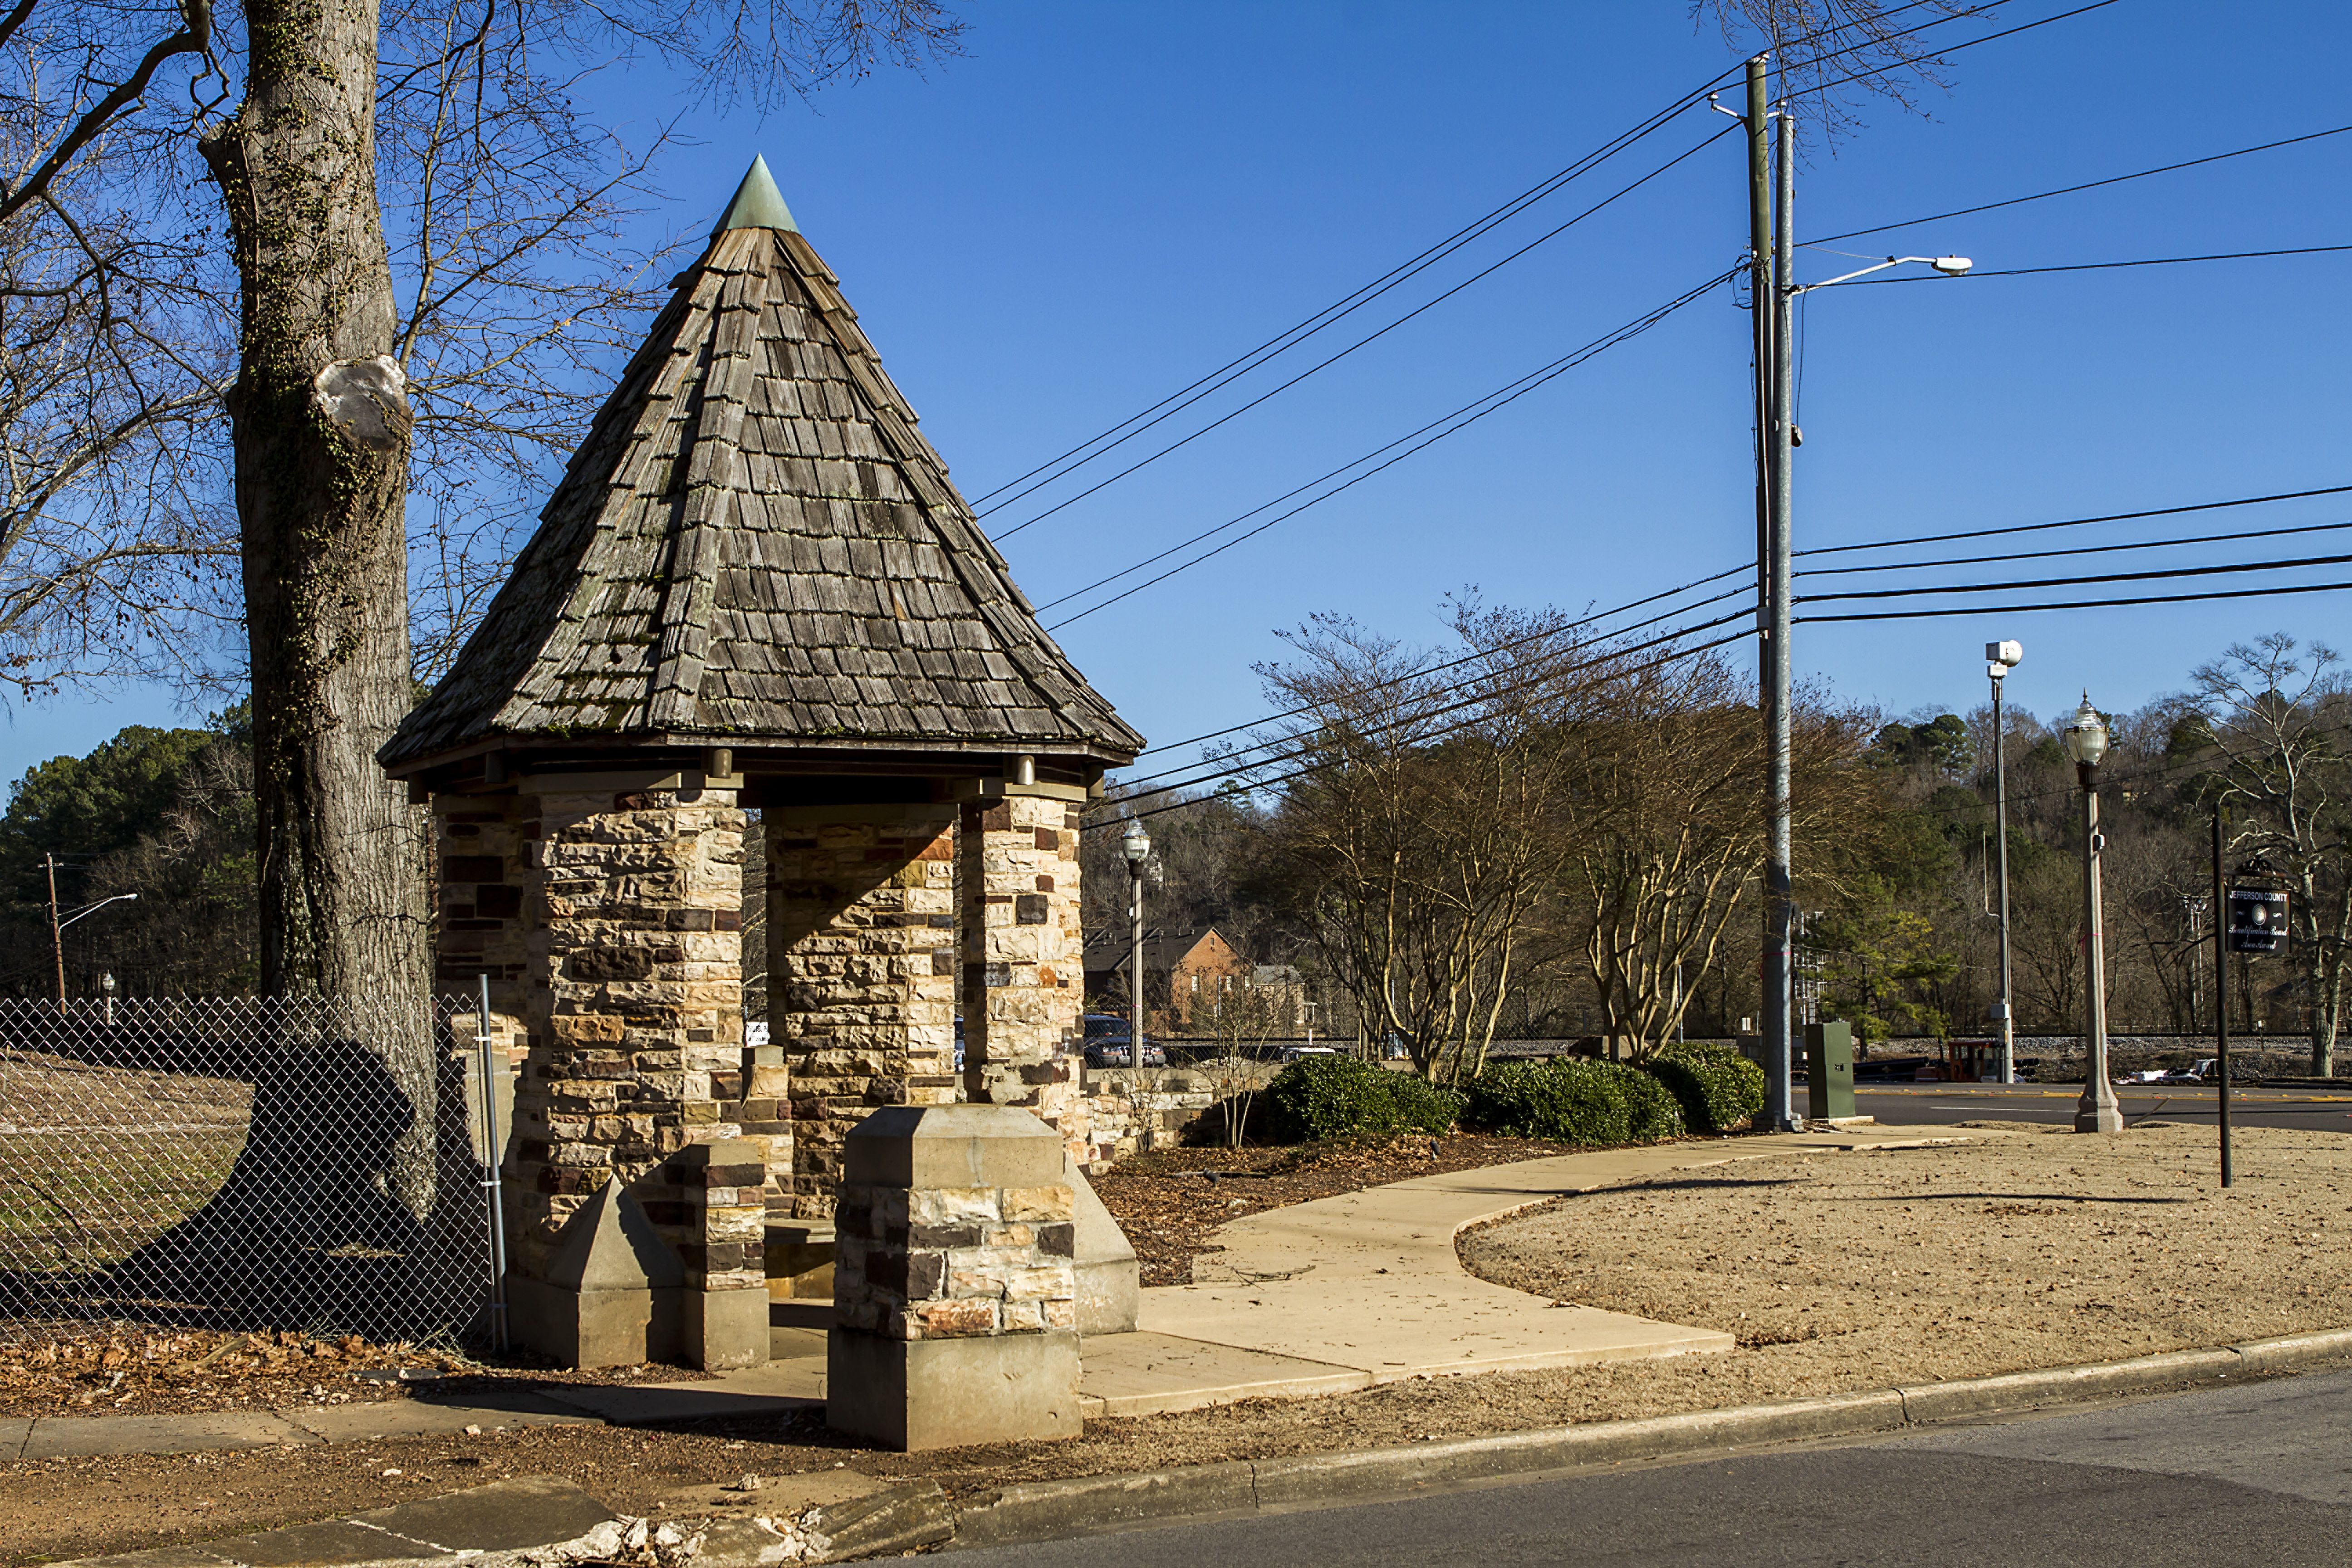 Trussville to hold a design and review meeting on Tuesday